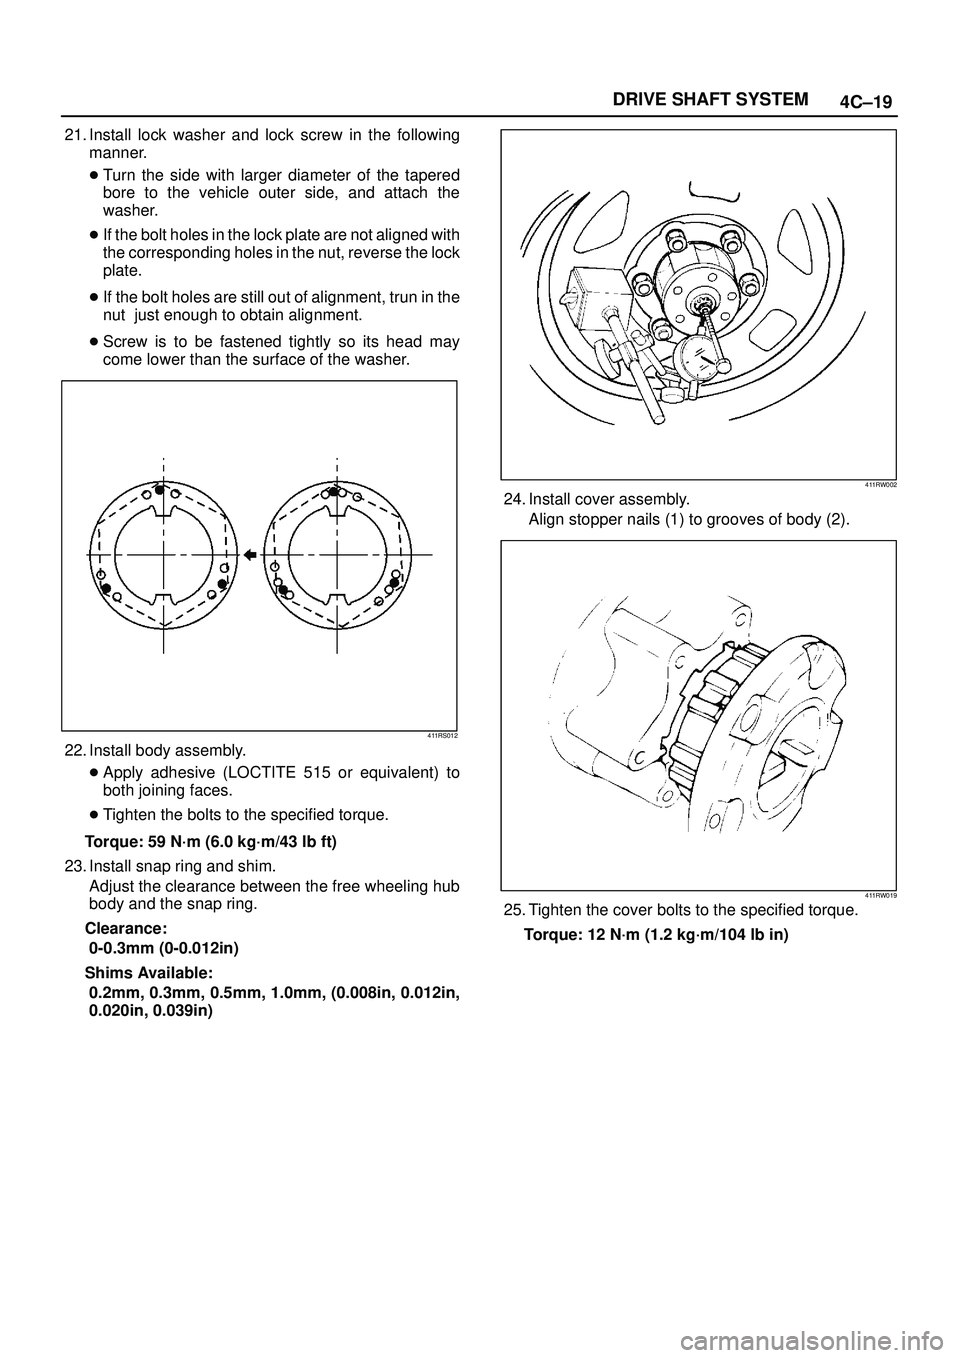 ISUZU TROOPER 1998  Service Owners Manual 4C±19 DRIVE SHAFT SYSTEM
21. Install lock washer and lock screw in the following
manner.
Turn the side with larger diameter of the tapered
bore to the vehicle outer side, and attach the
washer.
If 